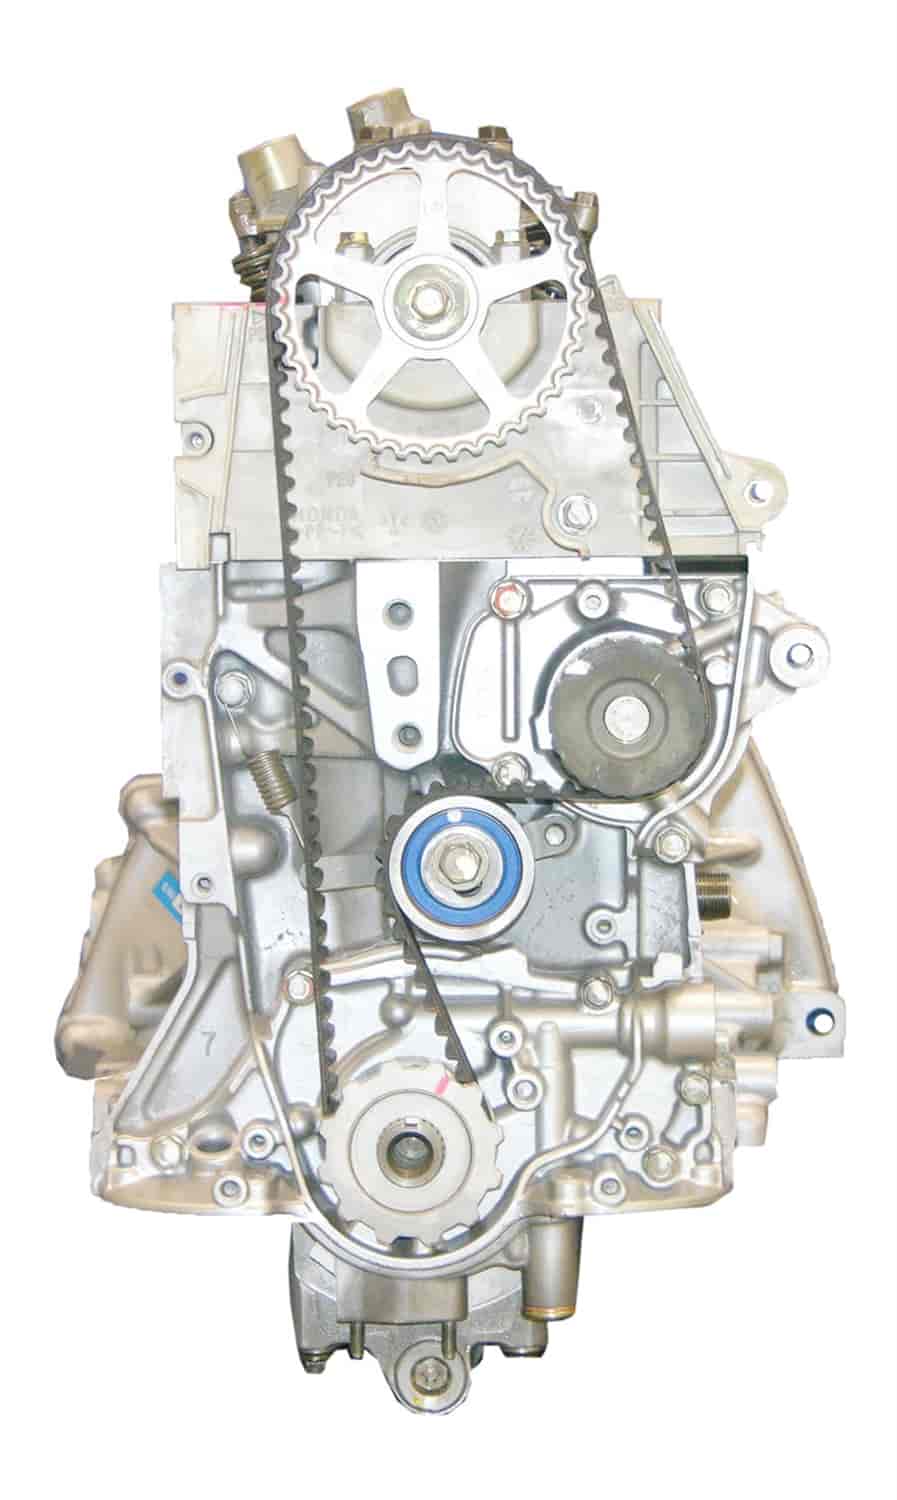 Remanufactured Crate Engine for 1999-2000 Honda Civic with